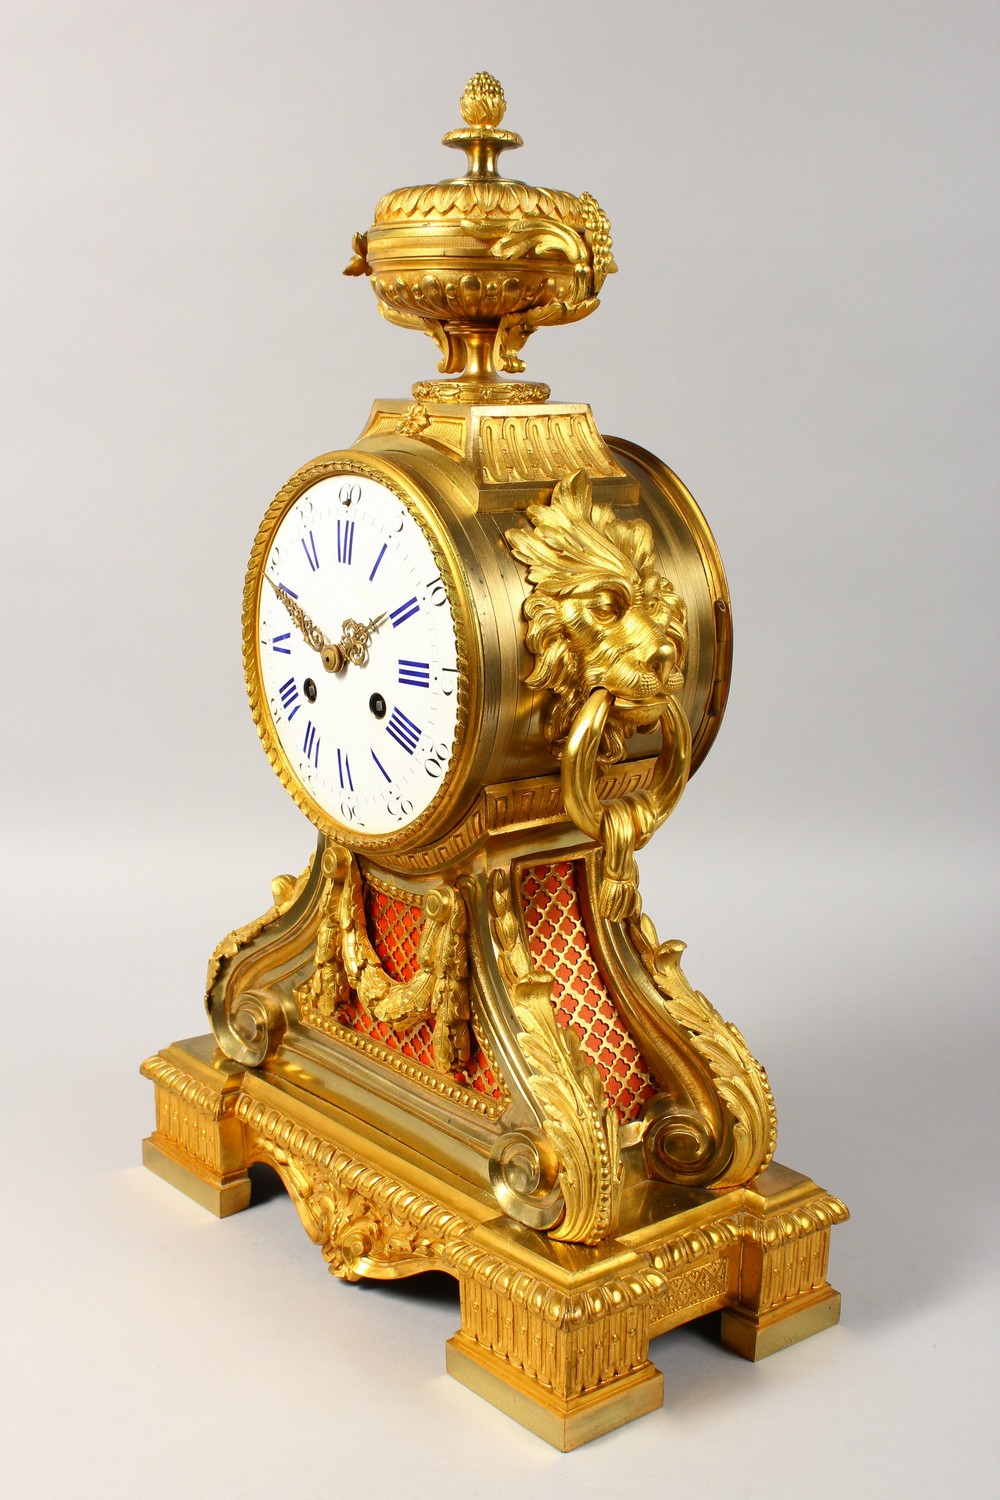 A GOOD 18TH CENTURY FRENCH ORMOLU CLOCK, with blue and white circular dial, eight-day movement - Image 3 of 8